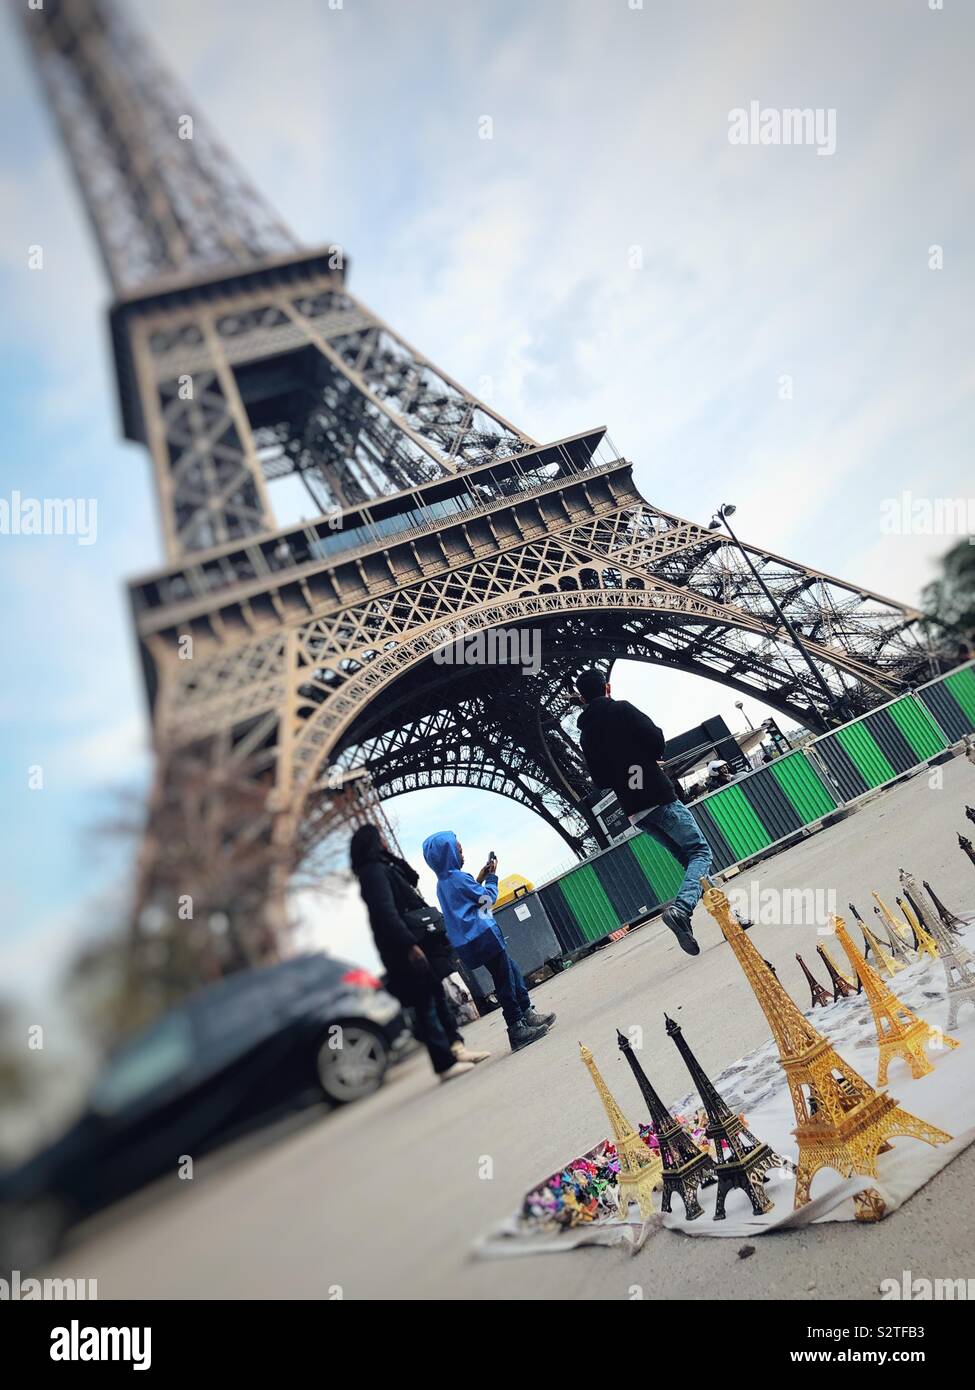 Souvenirs at the foot of Eiffel Tower in Paris Stock Photo